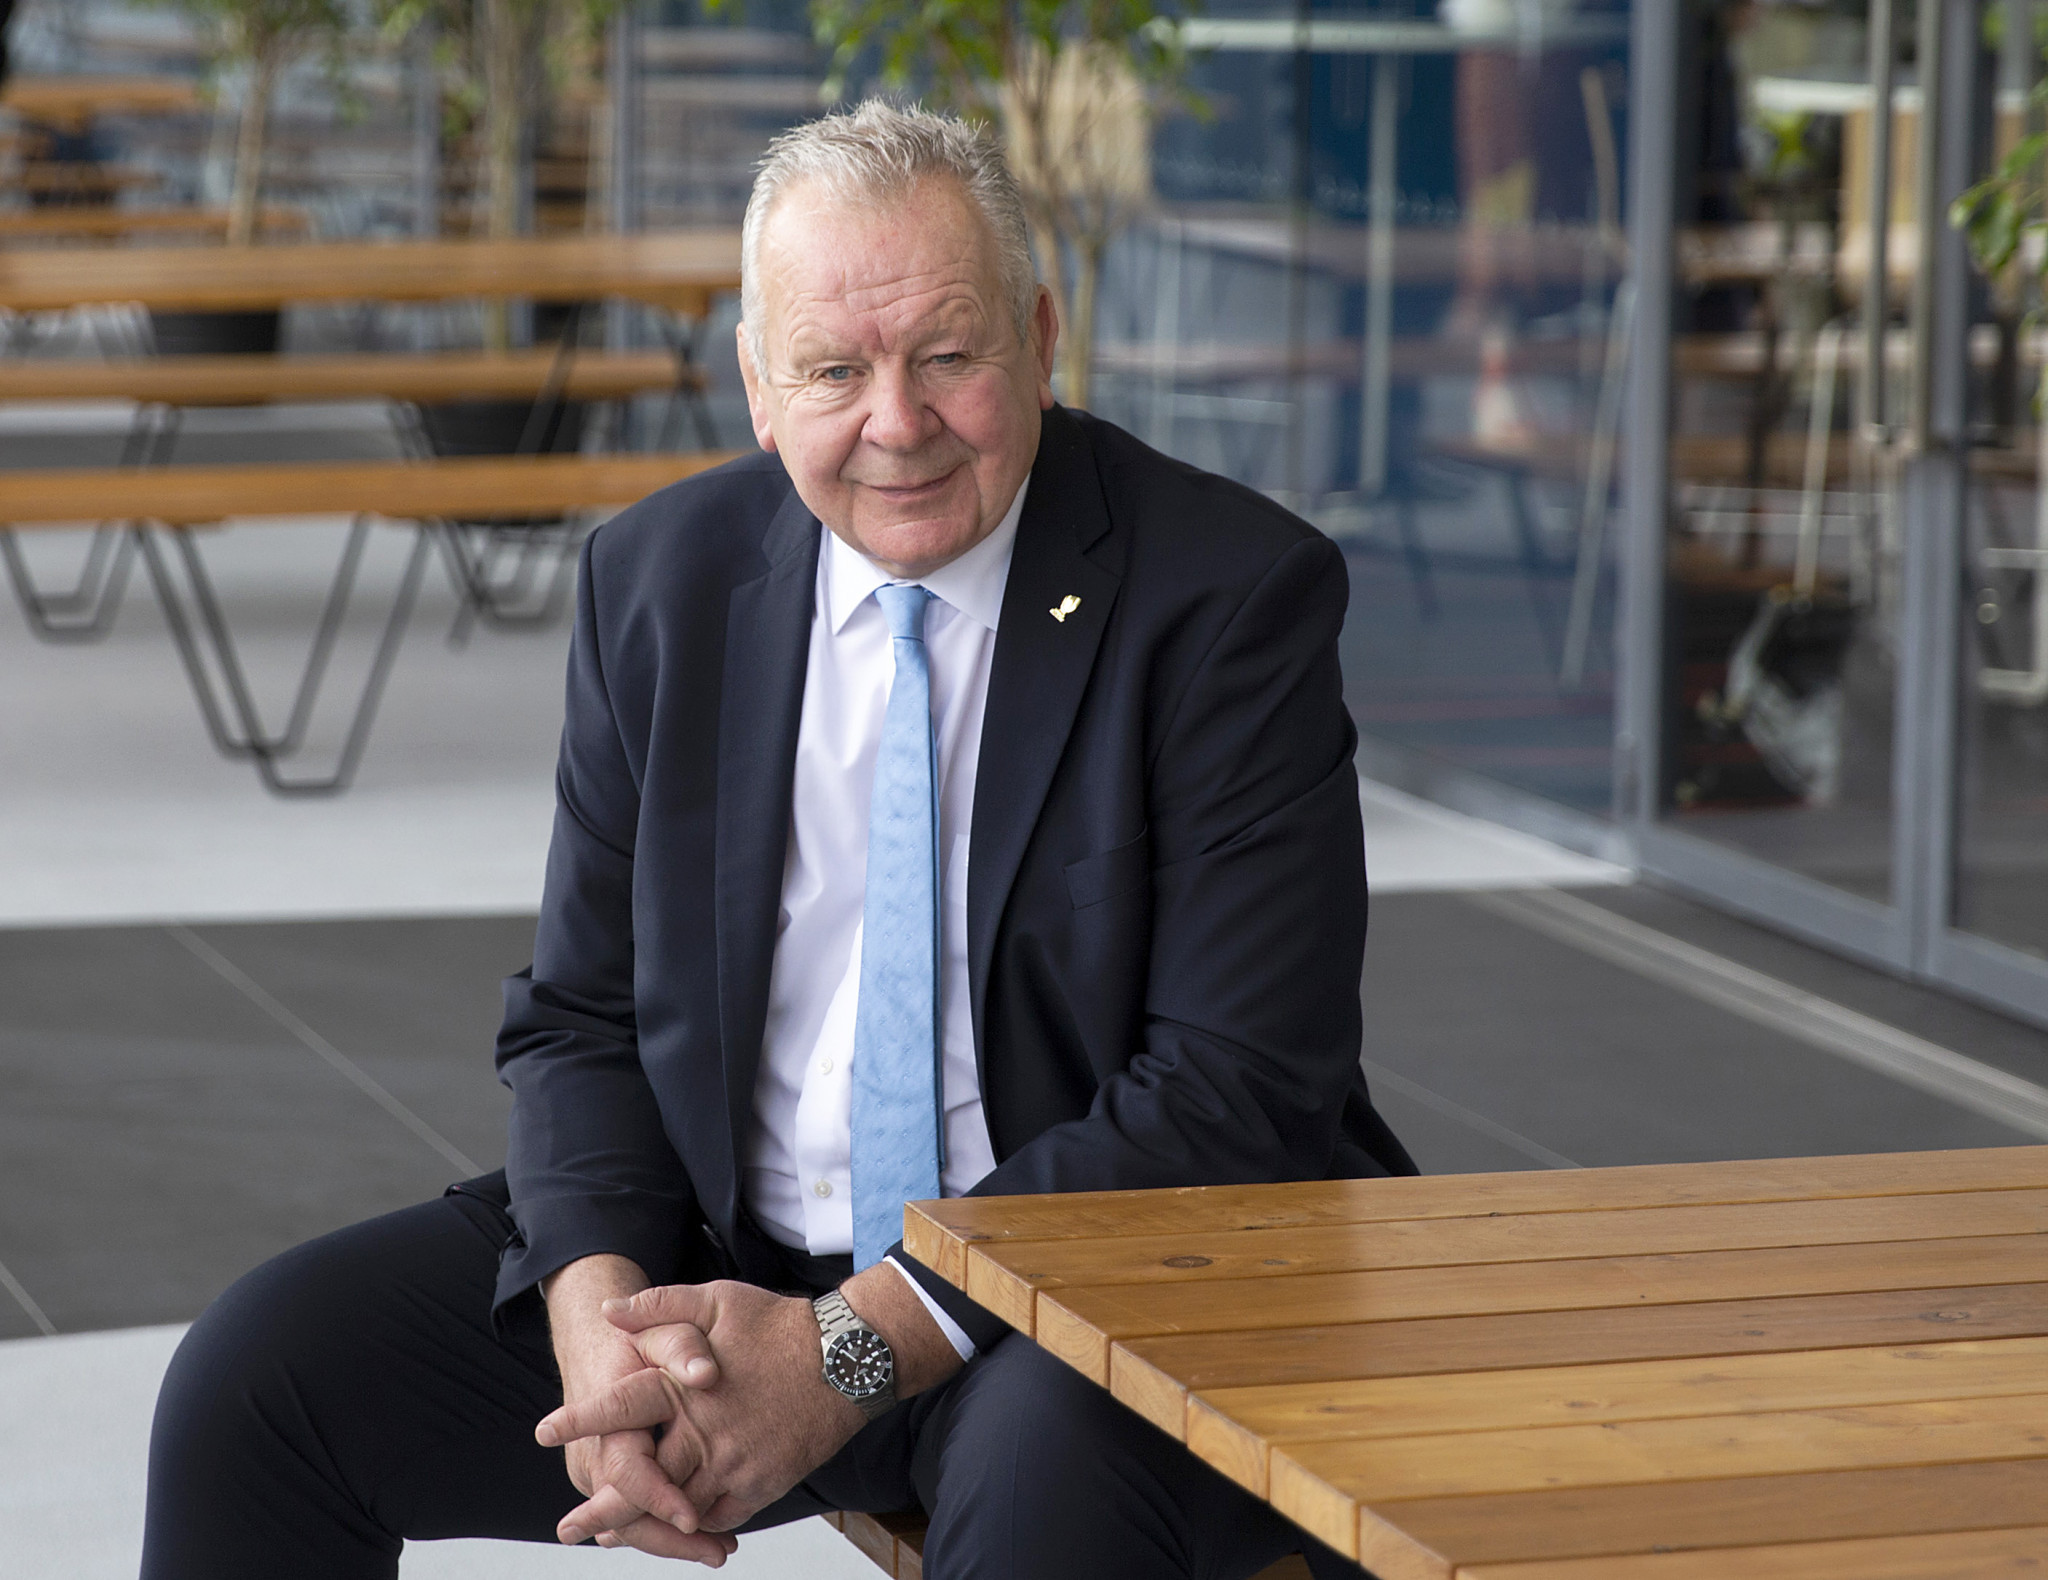 Rugby Europe announced they are supporting Sir Bill Beaumont in his bid to be re-elected as World Rugby chairman ©Getty Images